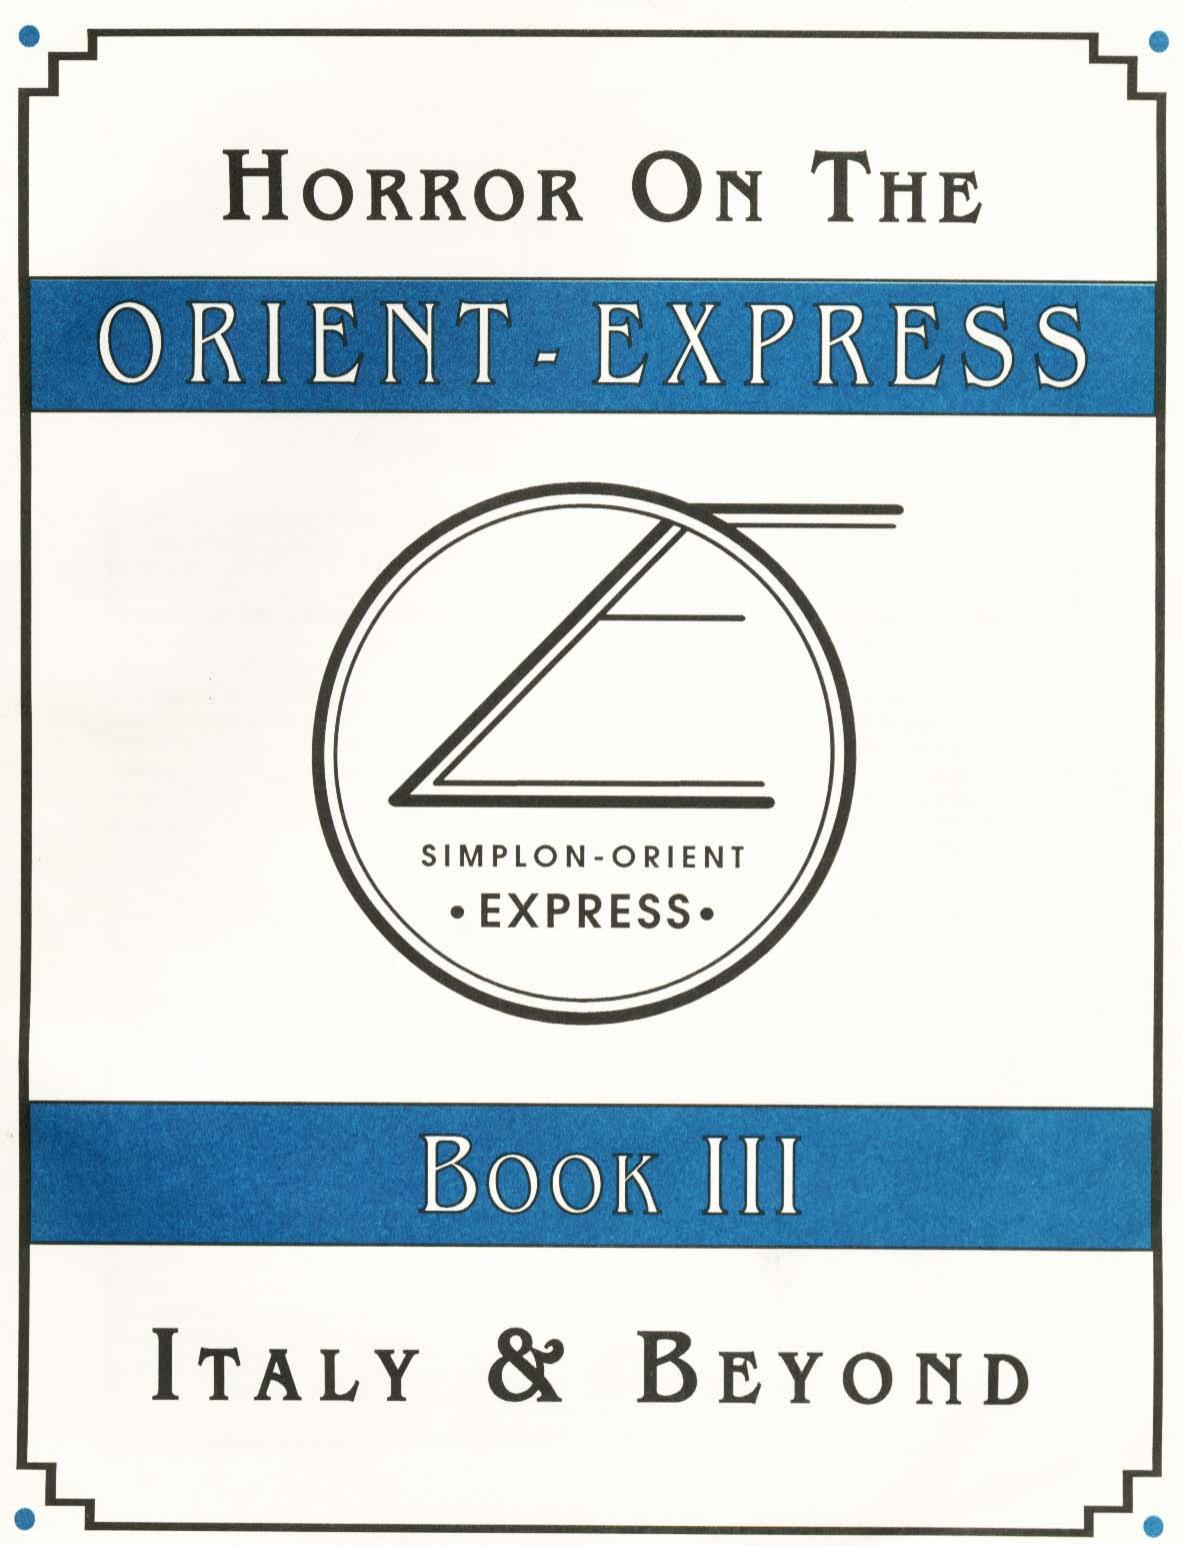 CoC Horror on the Orient Express Book 3